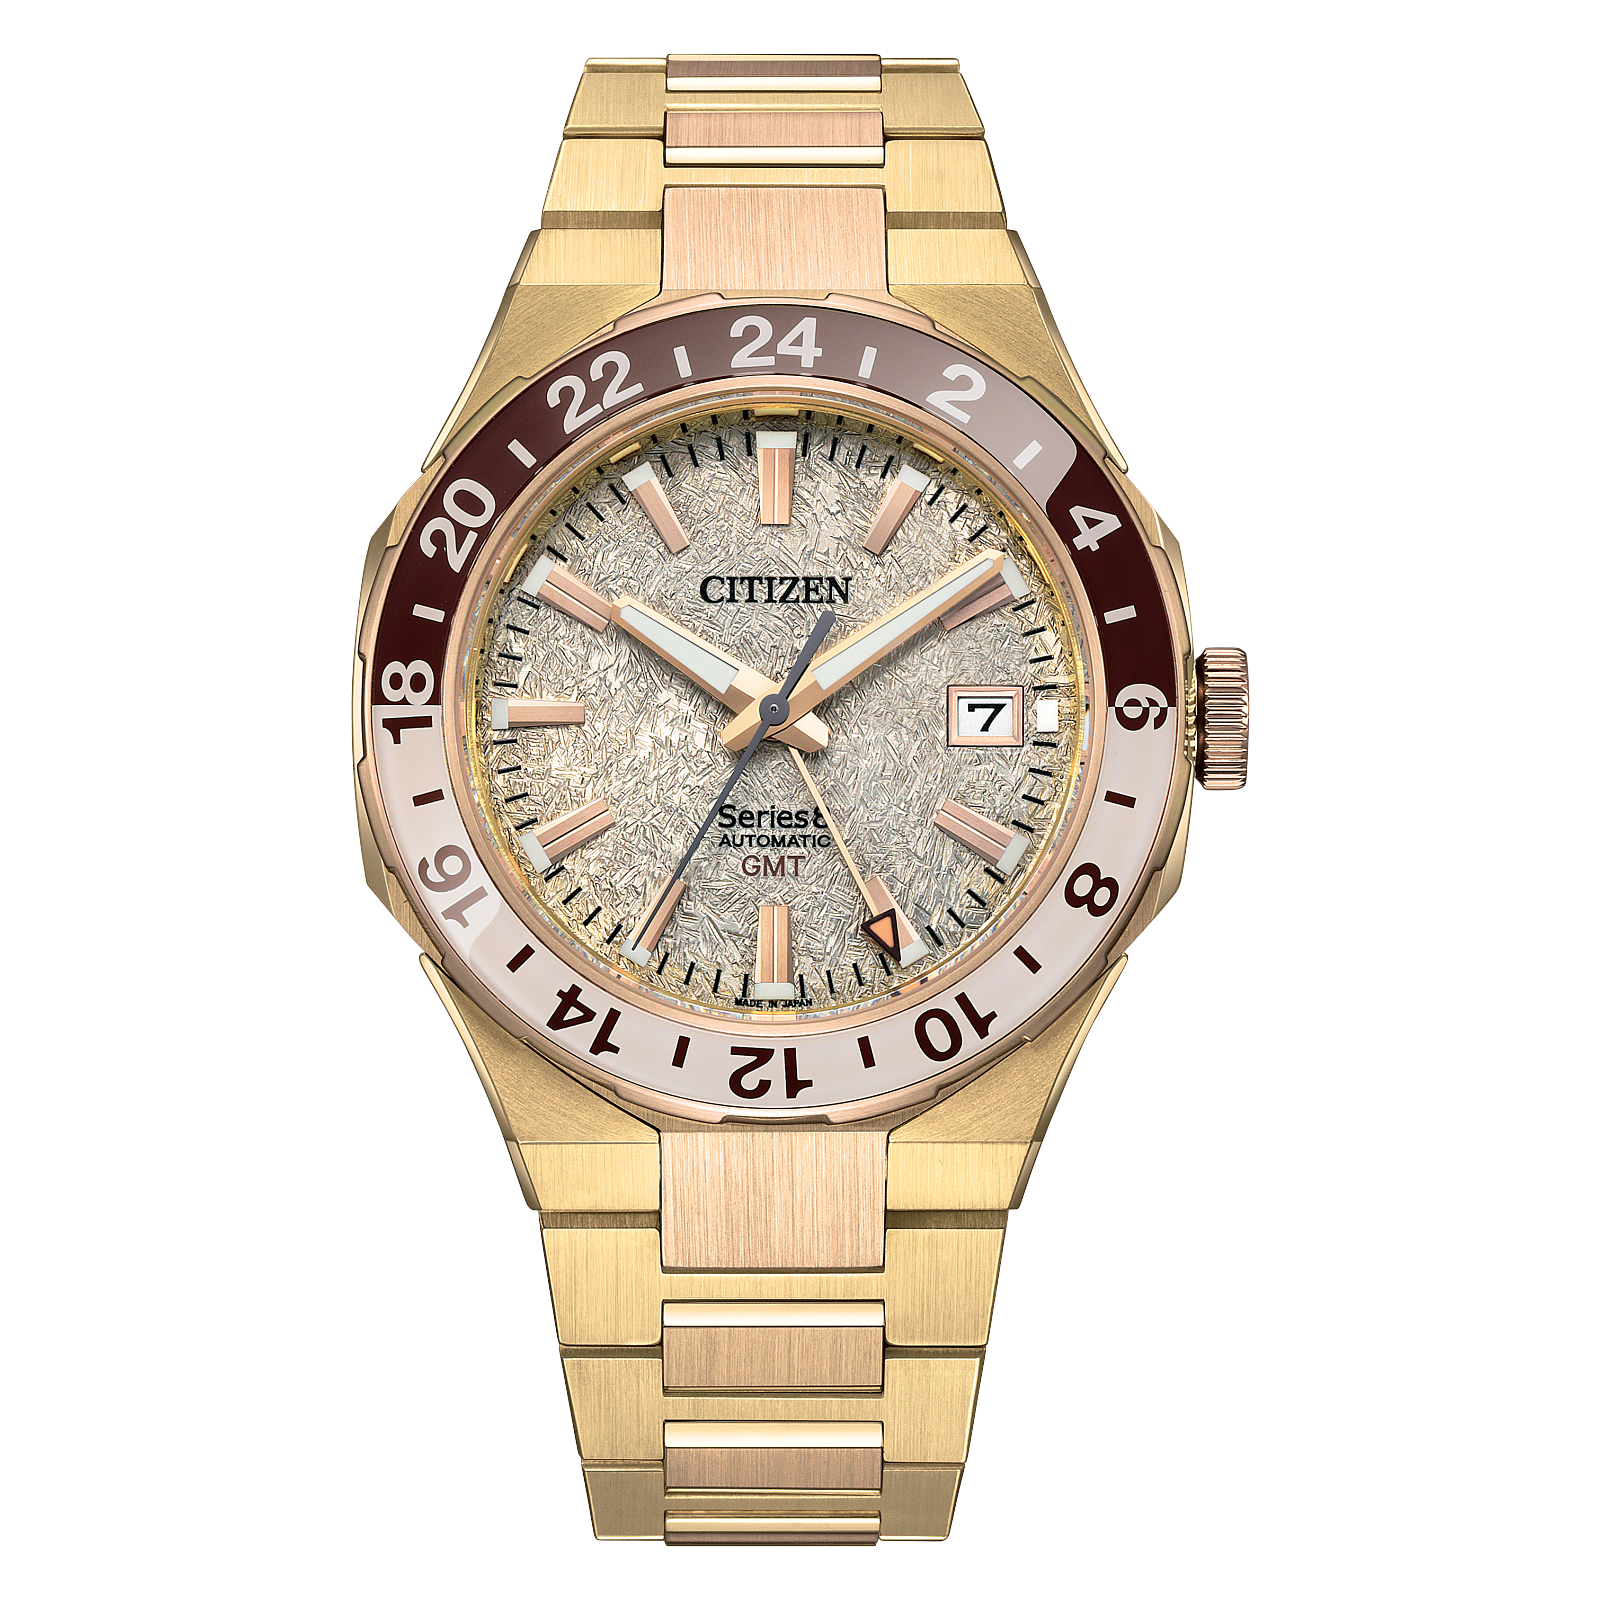 Citizen Automatic Limited Edition Series8 880 GMT NB6032-53P